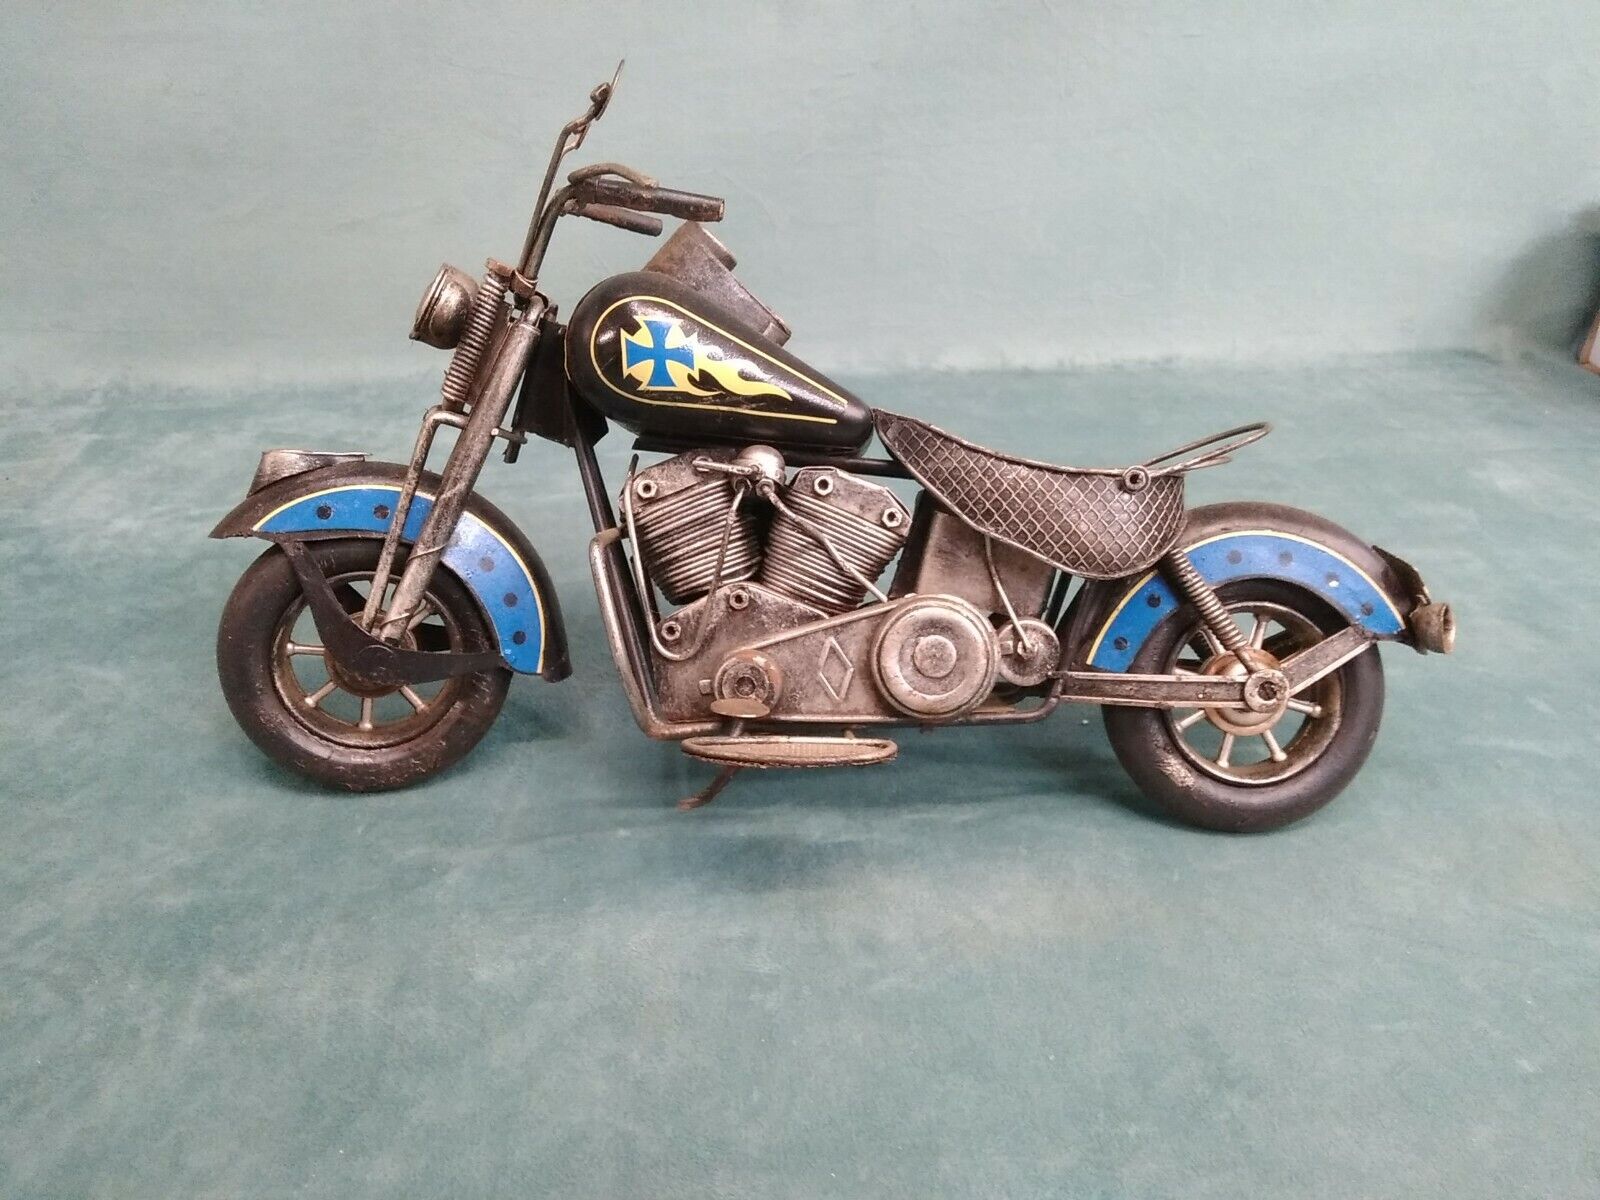 Unique Metal Motorcycle Chopper Art Sculpture Harley Lovers Will Be Thrilled VTG